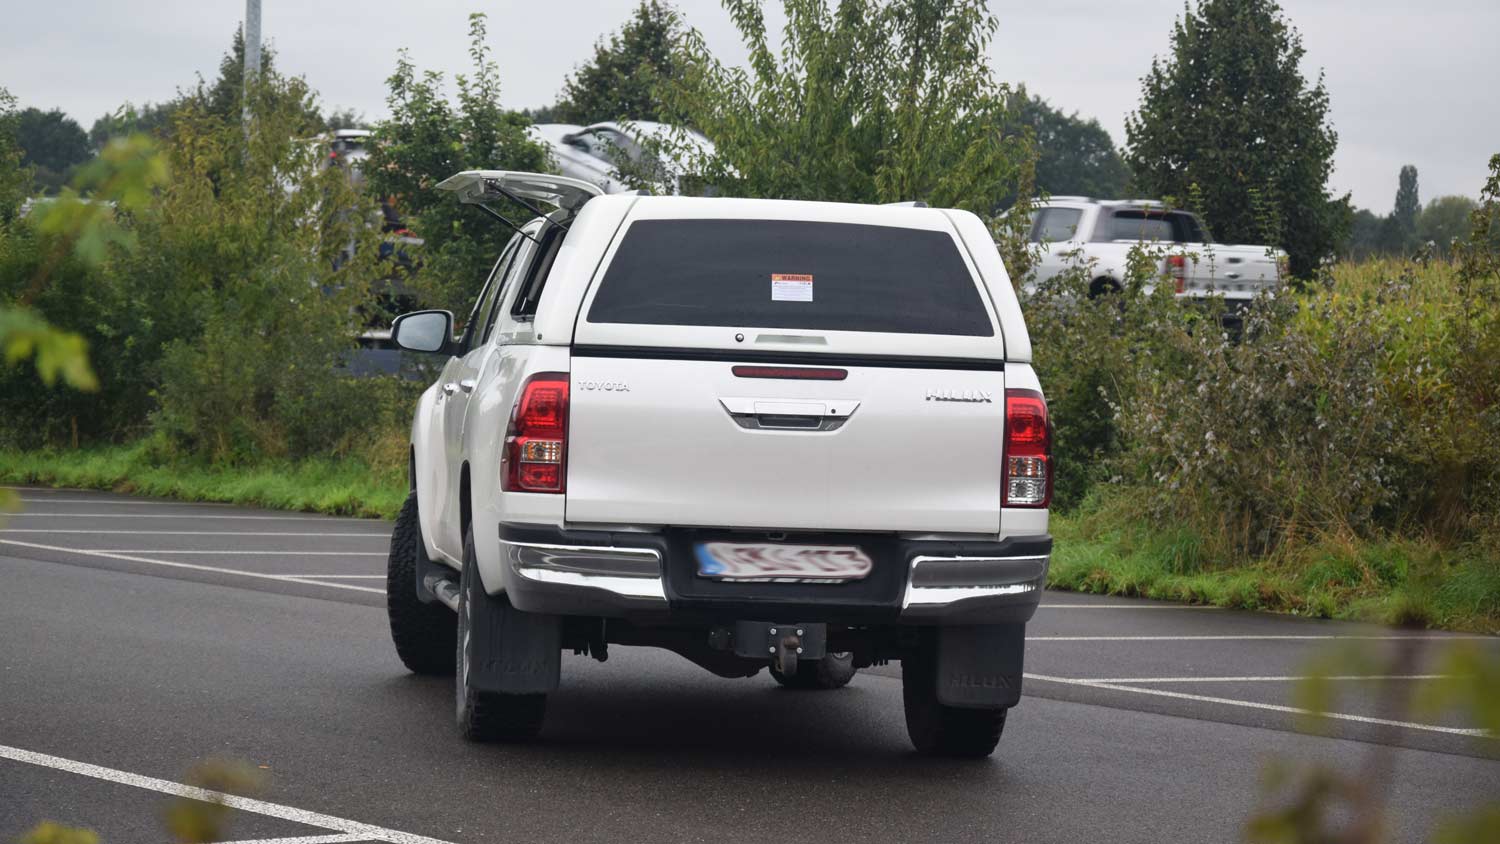 Force Pro Plus Canopy on Toyota Hilux 2016 rear view